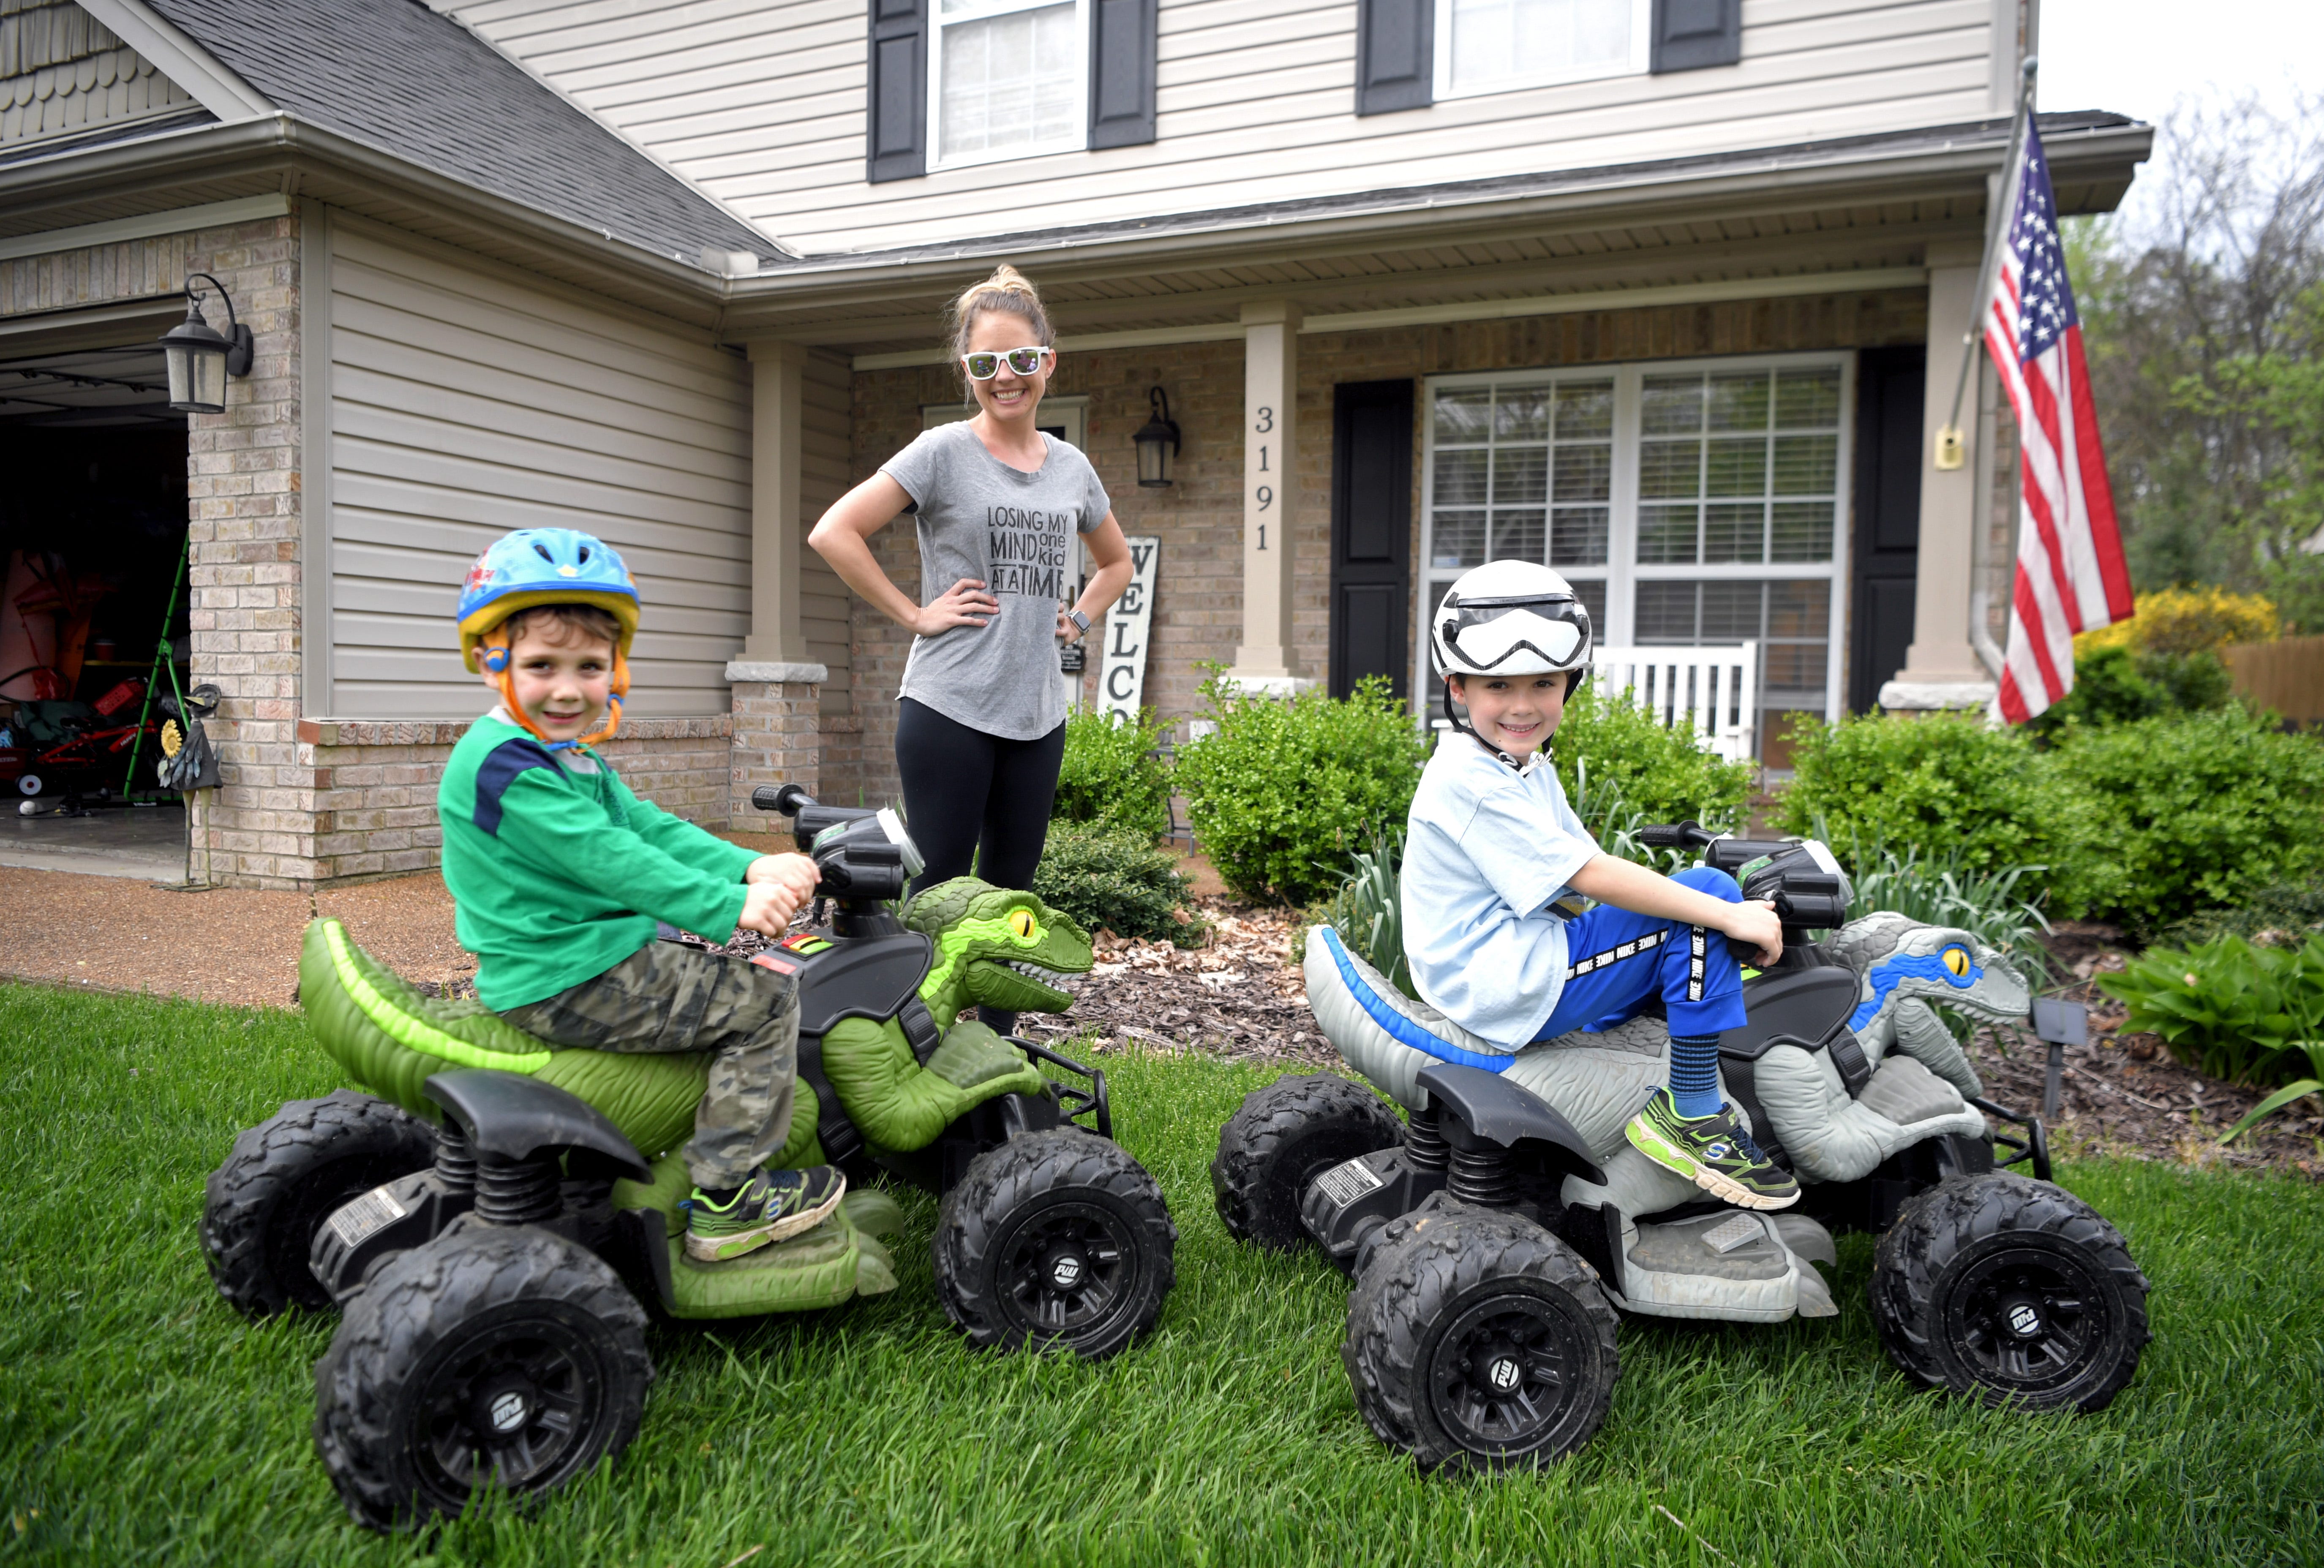 Pearre Creek Elementary School assistant teacher Kelly Jo Thompson and her children, Blair and Milo, play in their Franklin front yard on April 11, 2020.